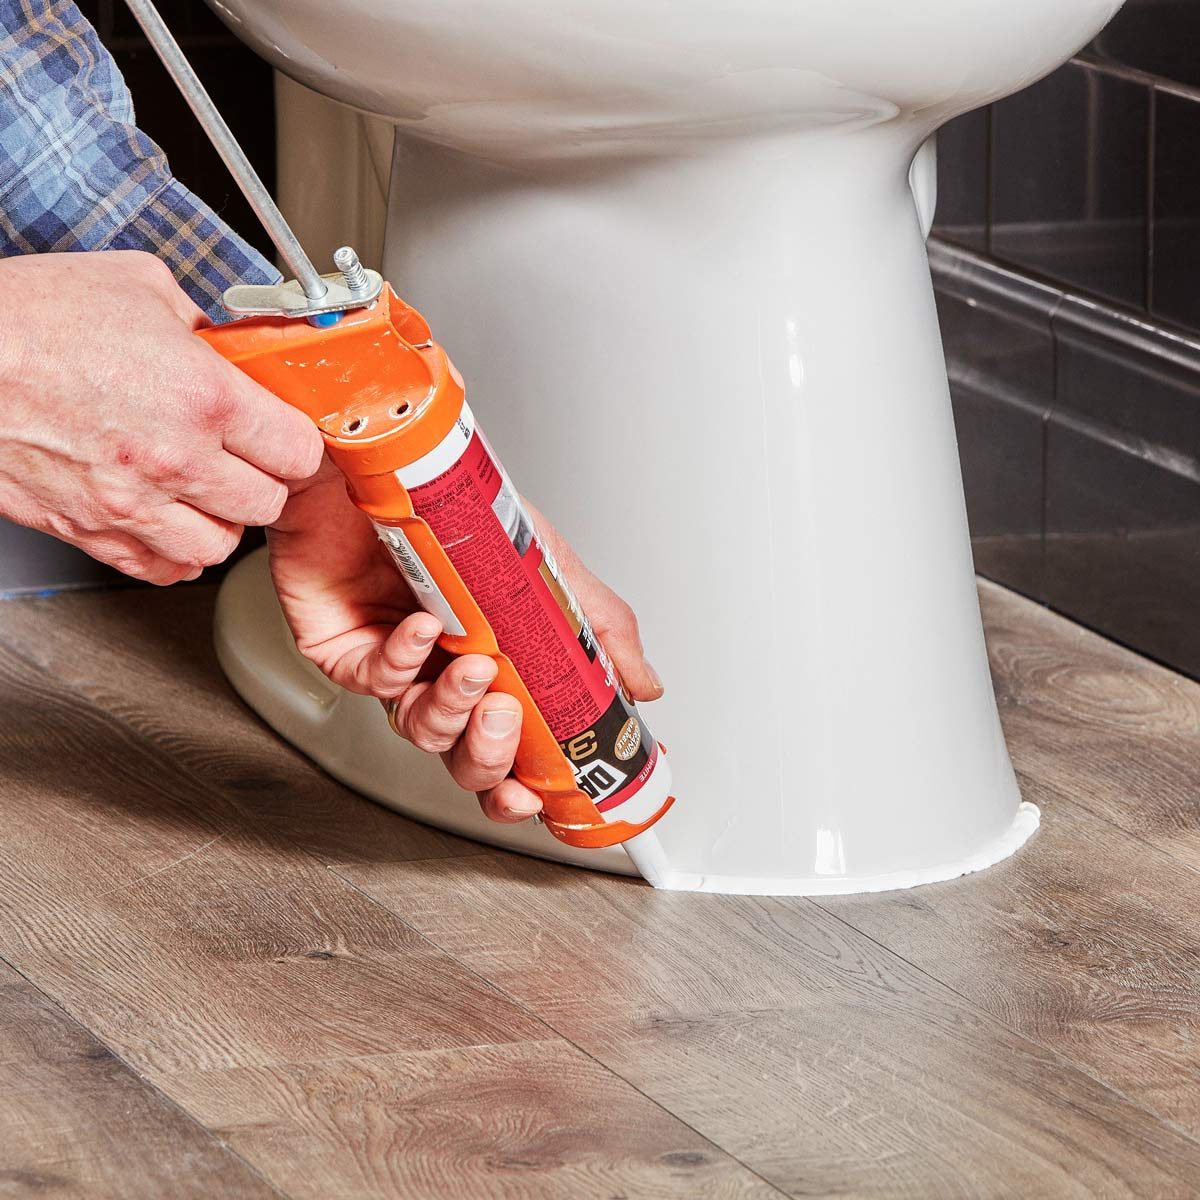 Why You Should Caulk Your Toilet To The Floor The Family Handyman